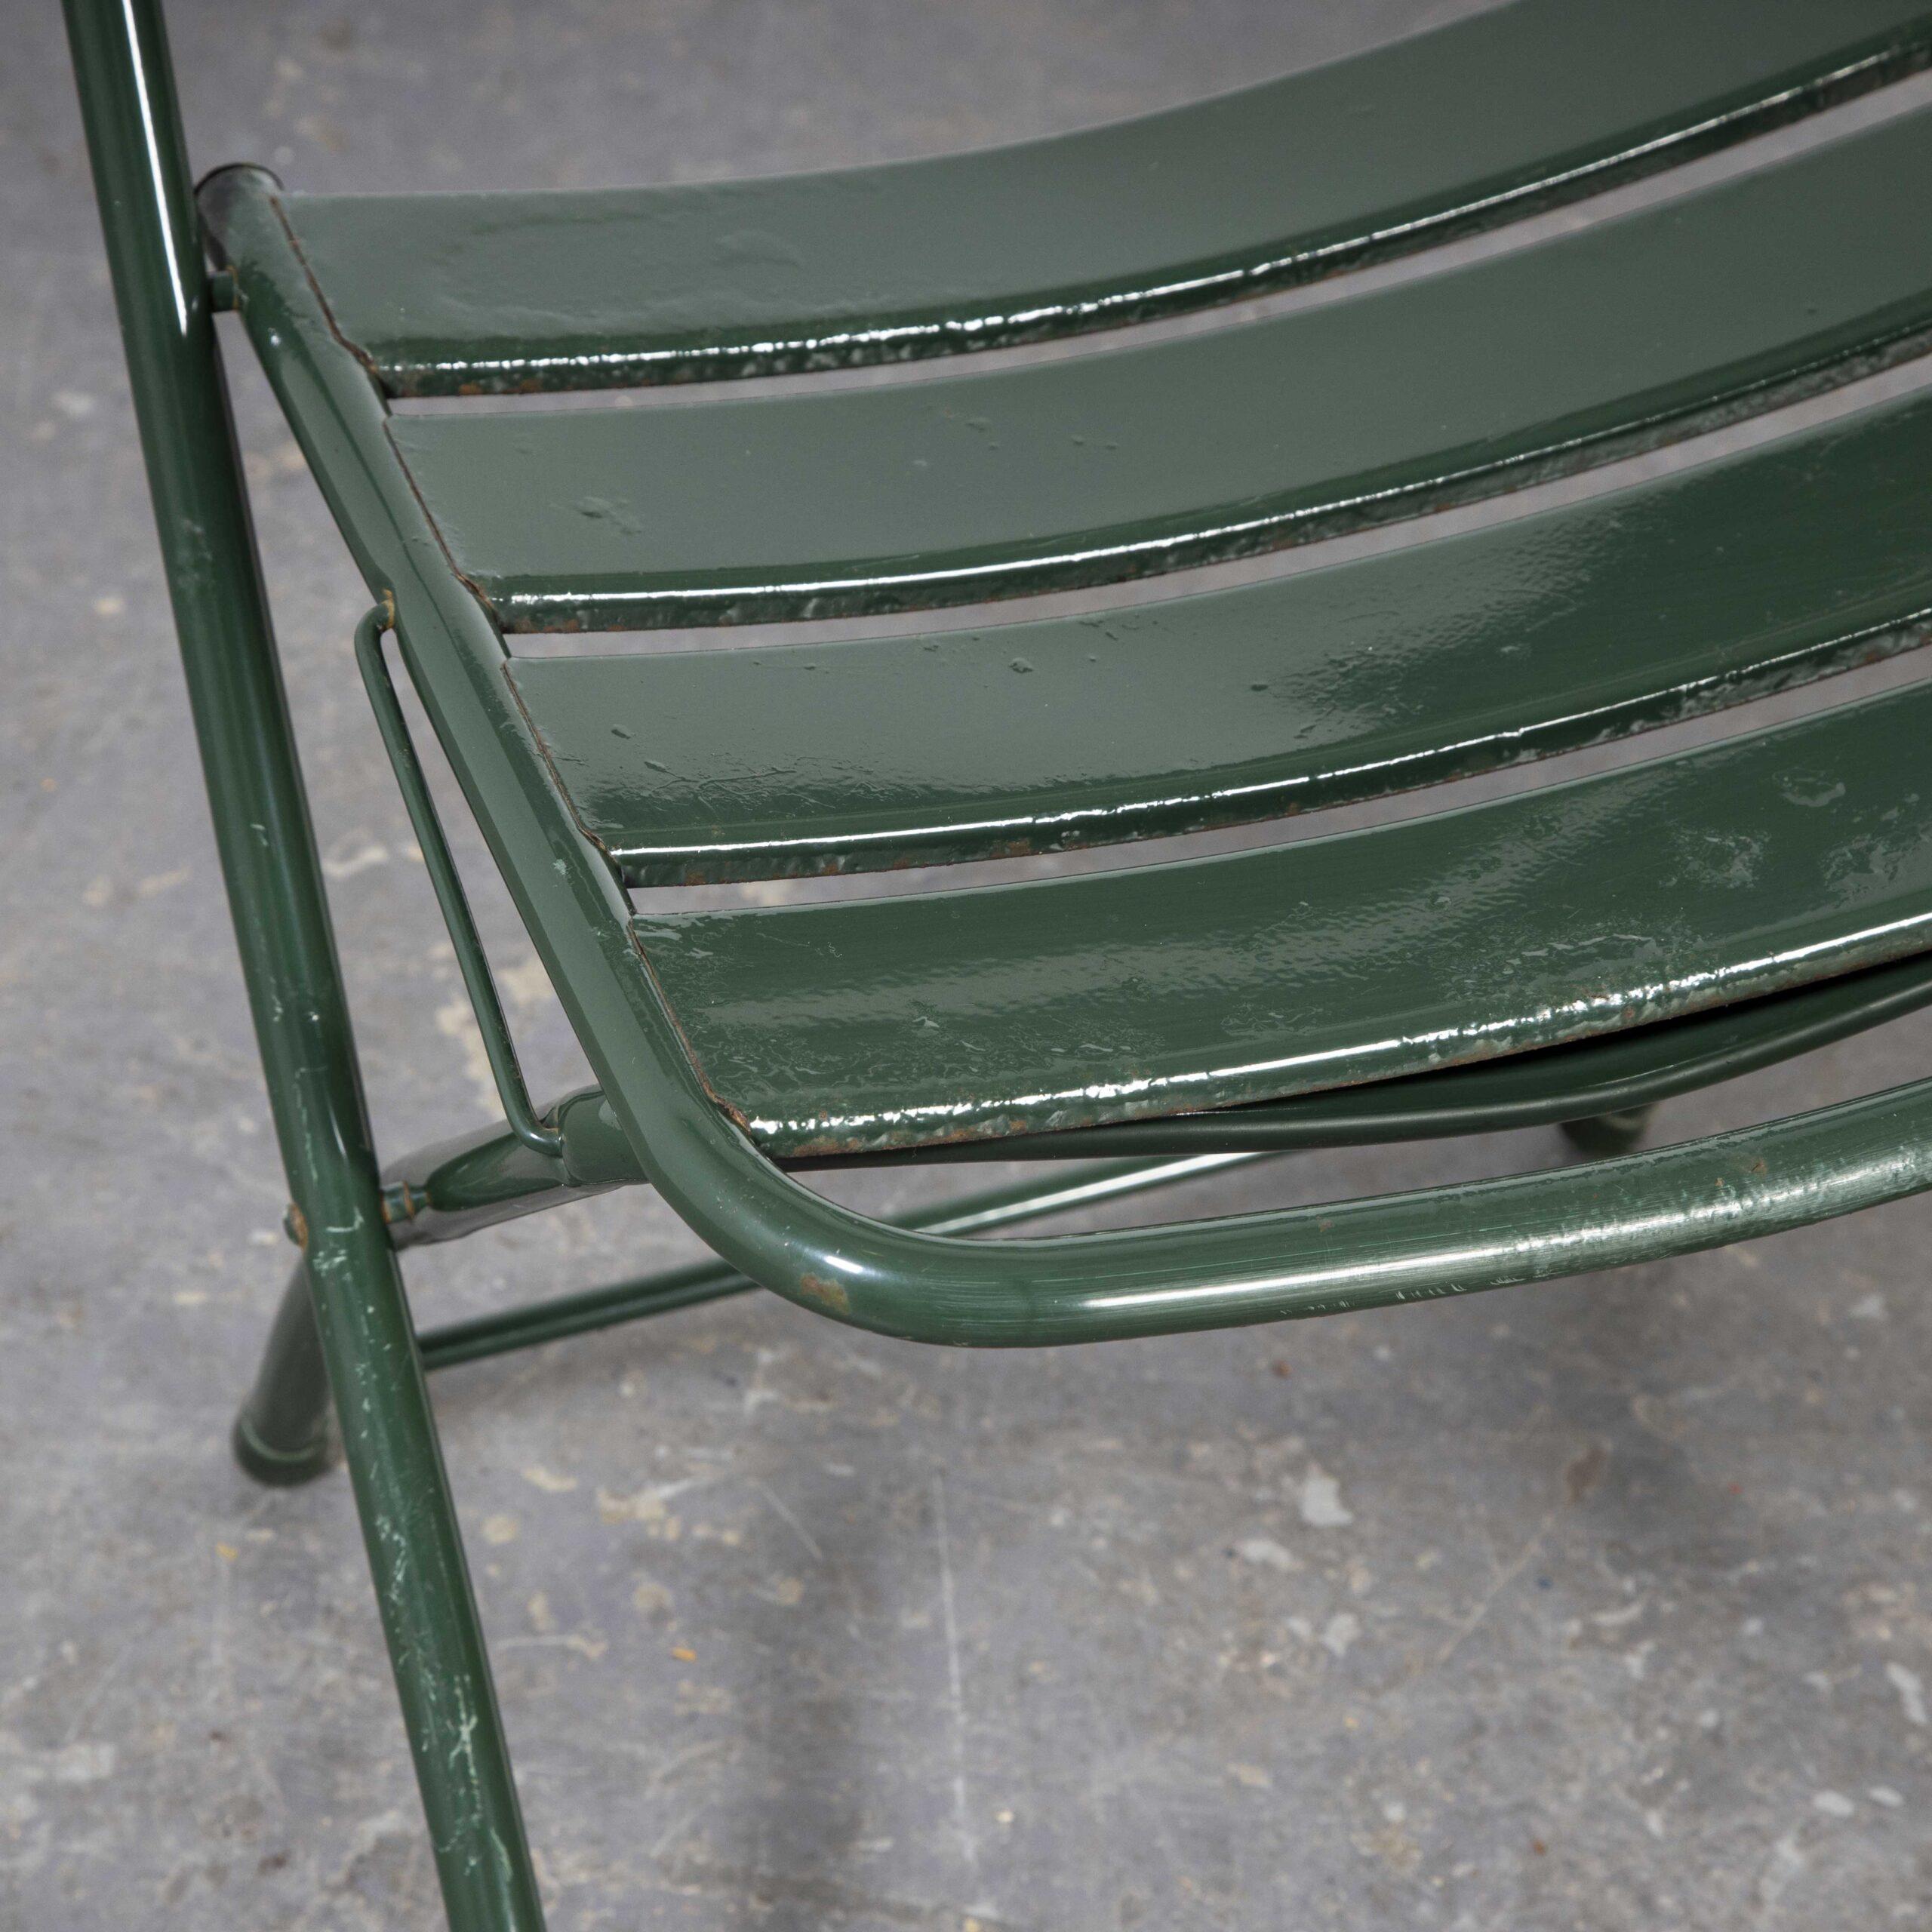 1960’s French army green metal folding chairs – Pair
1960’s French army green metal folding chairs – Pair. Very good quality French folding chairs from the 1960’s, we don’t know the history or the maker but they are heavy and solid with great seat